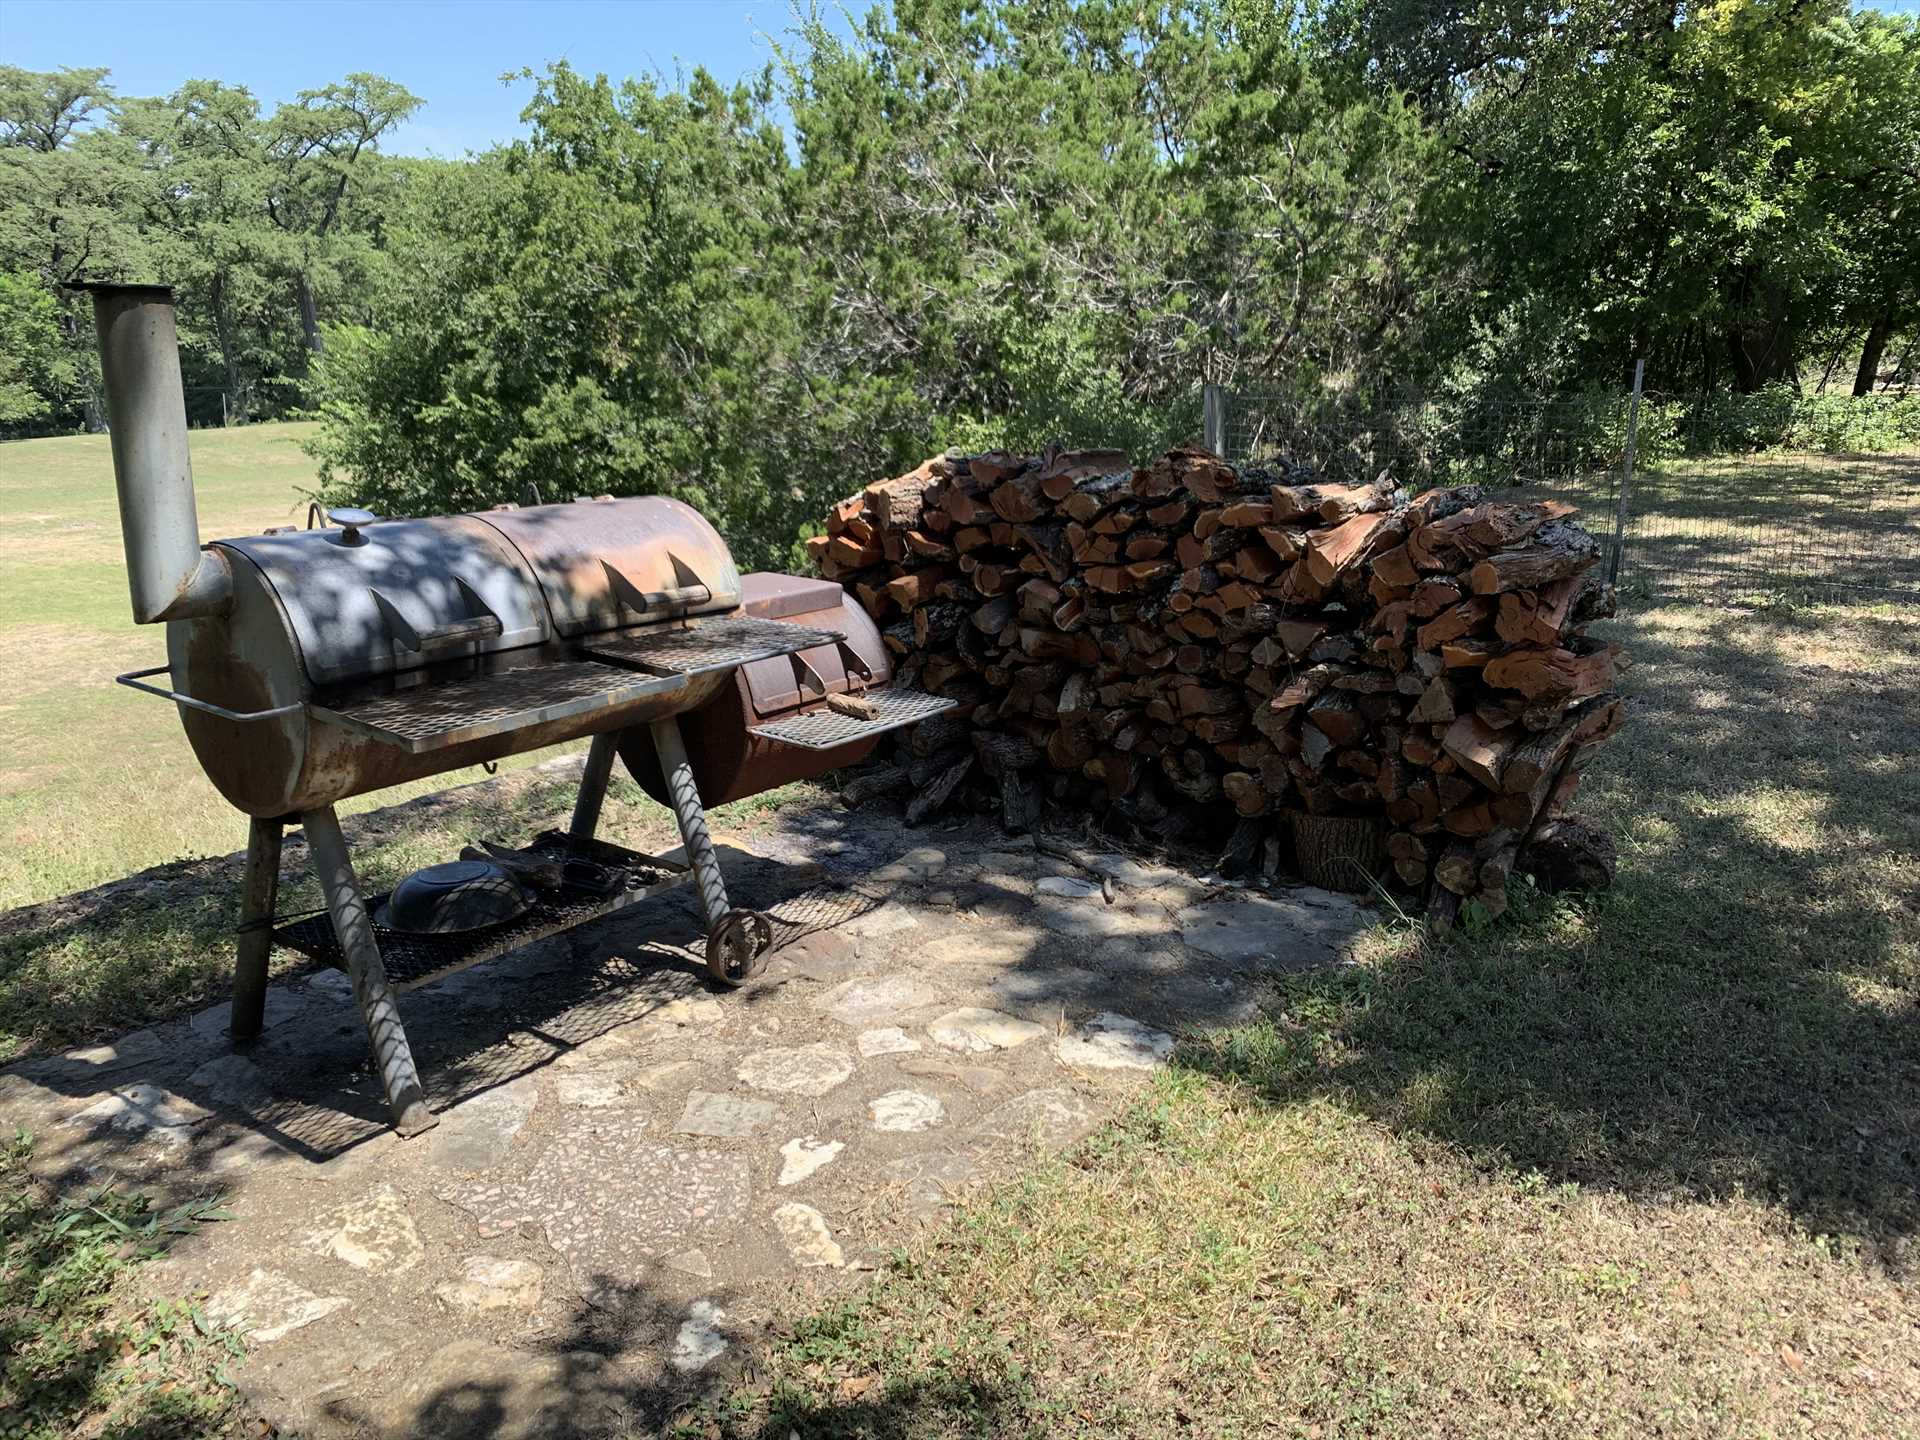                                                 Bring along your charcoal, wood chips, and BBQ skills! It's not Texas without a hearty BBQ.